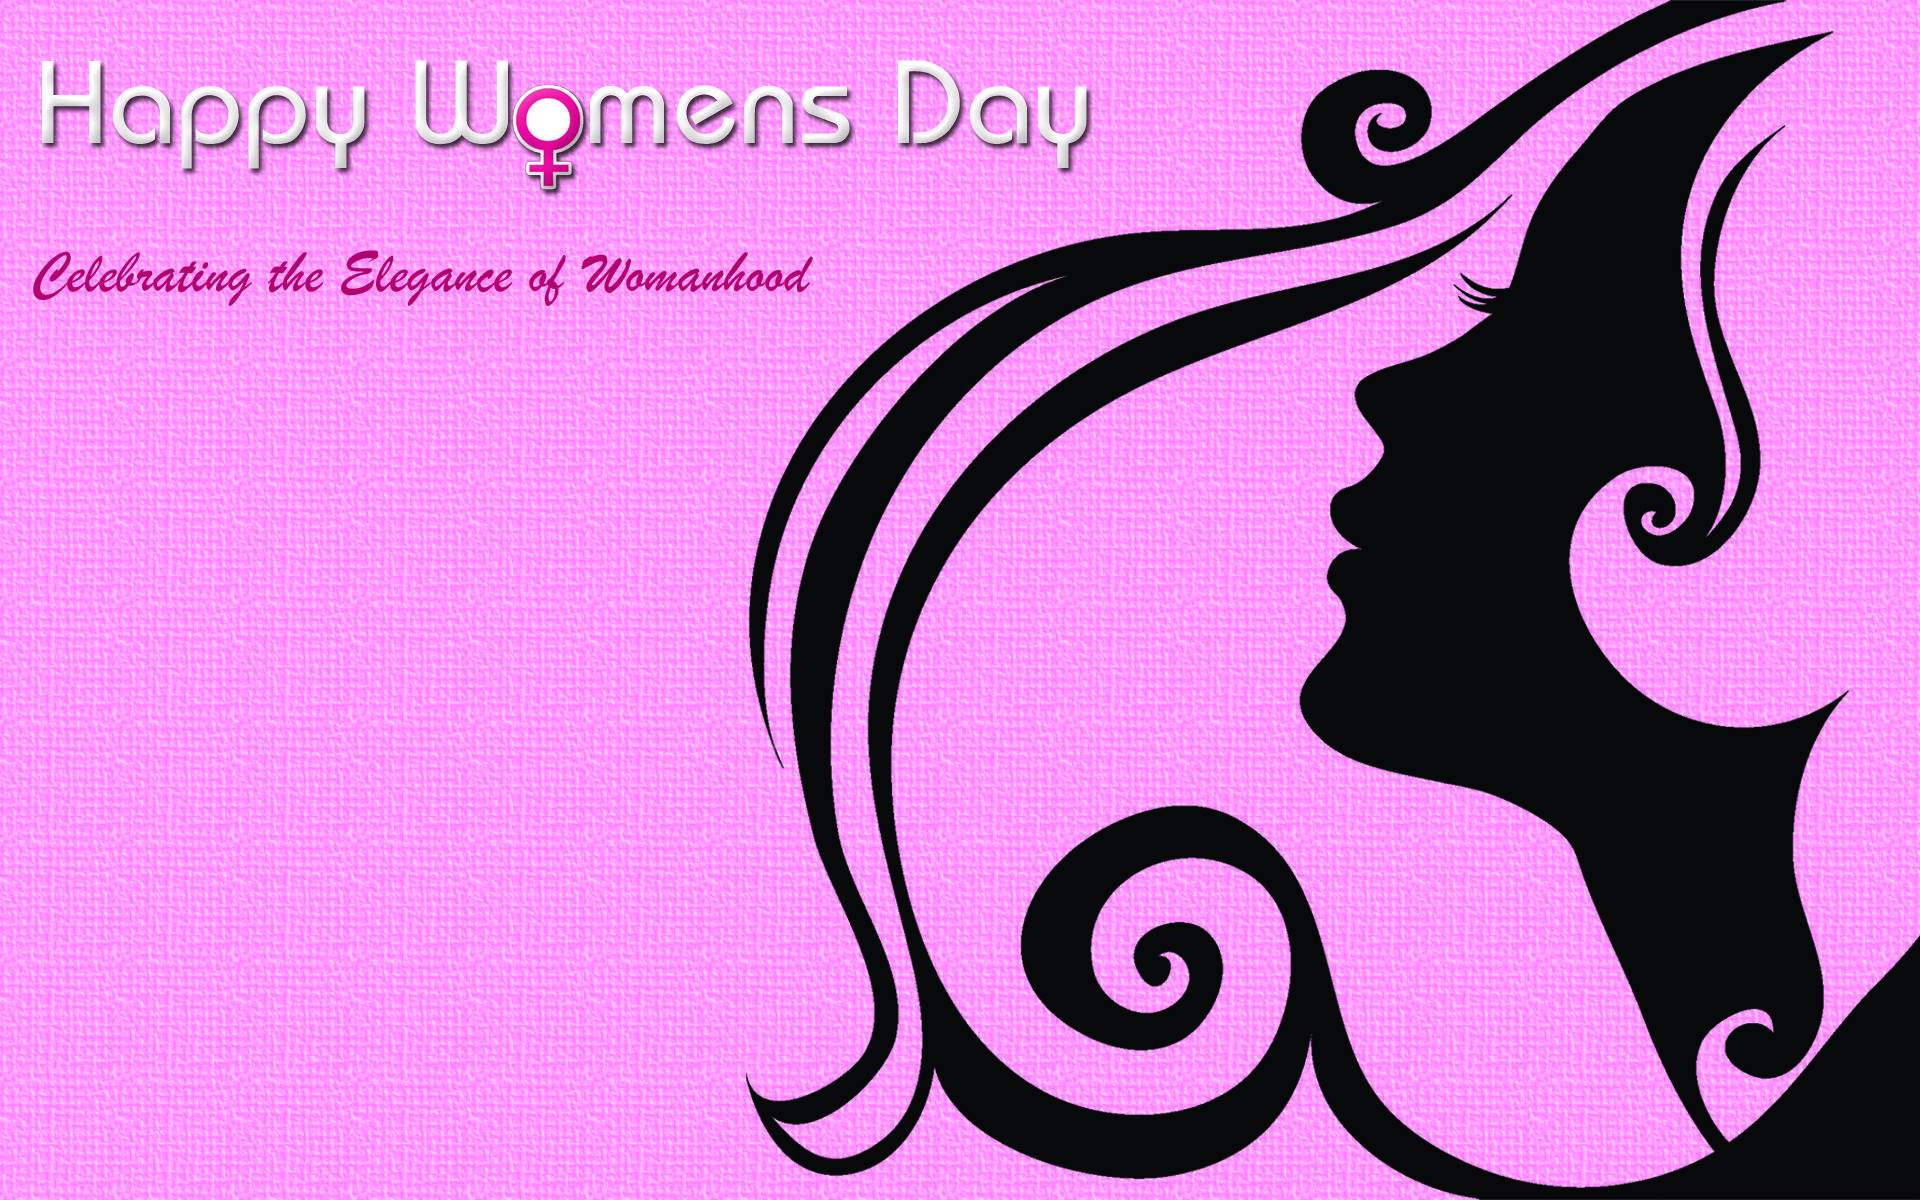 Top # 20+{8th March}* Women's Day Image Wallpaper & Photo {2018}*